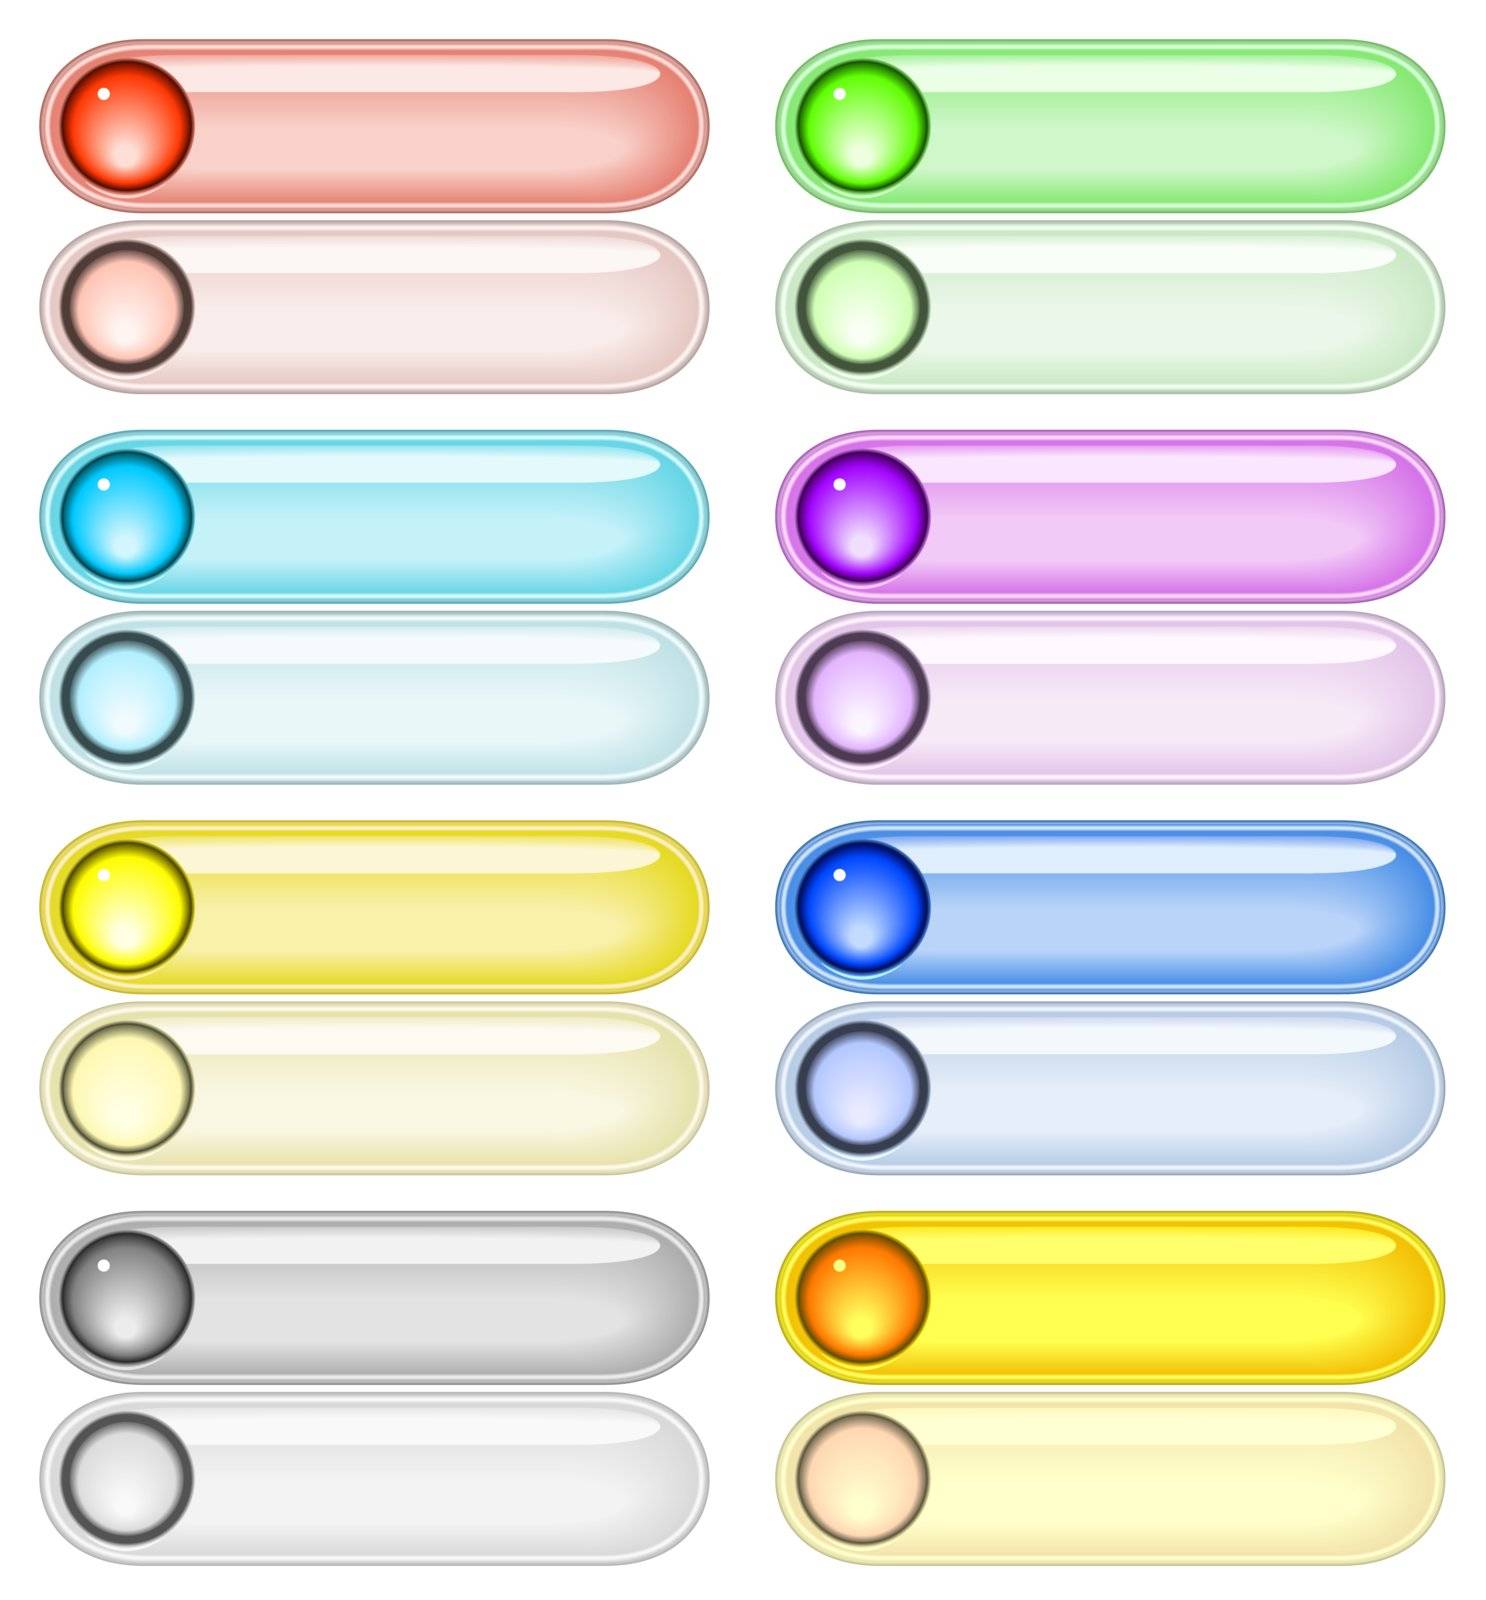 Set of editable vector web buttons in pairs of bright and pale colors for on and off